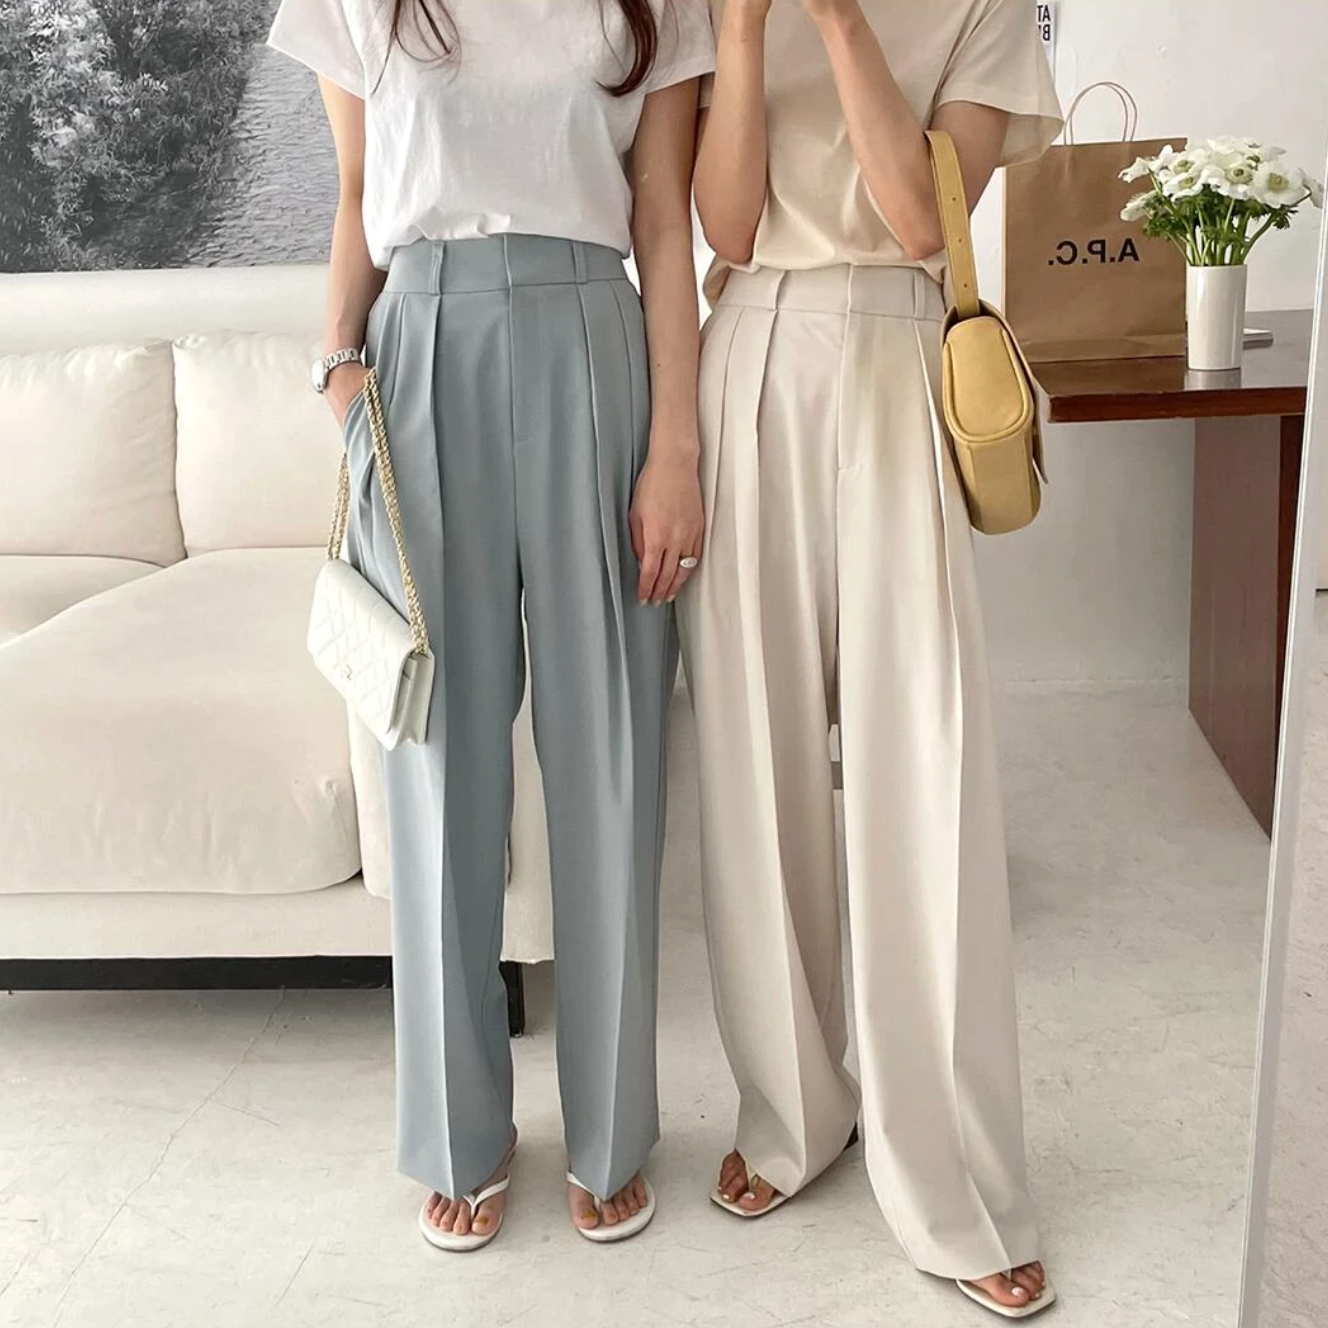 [Korean Style] Solid Color Pleated Trousers Dress-up Pants